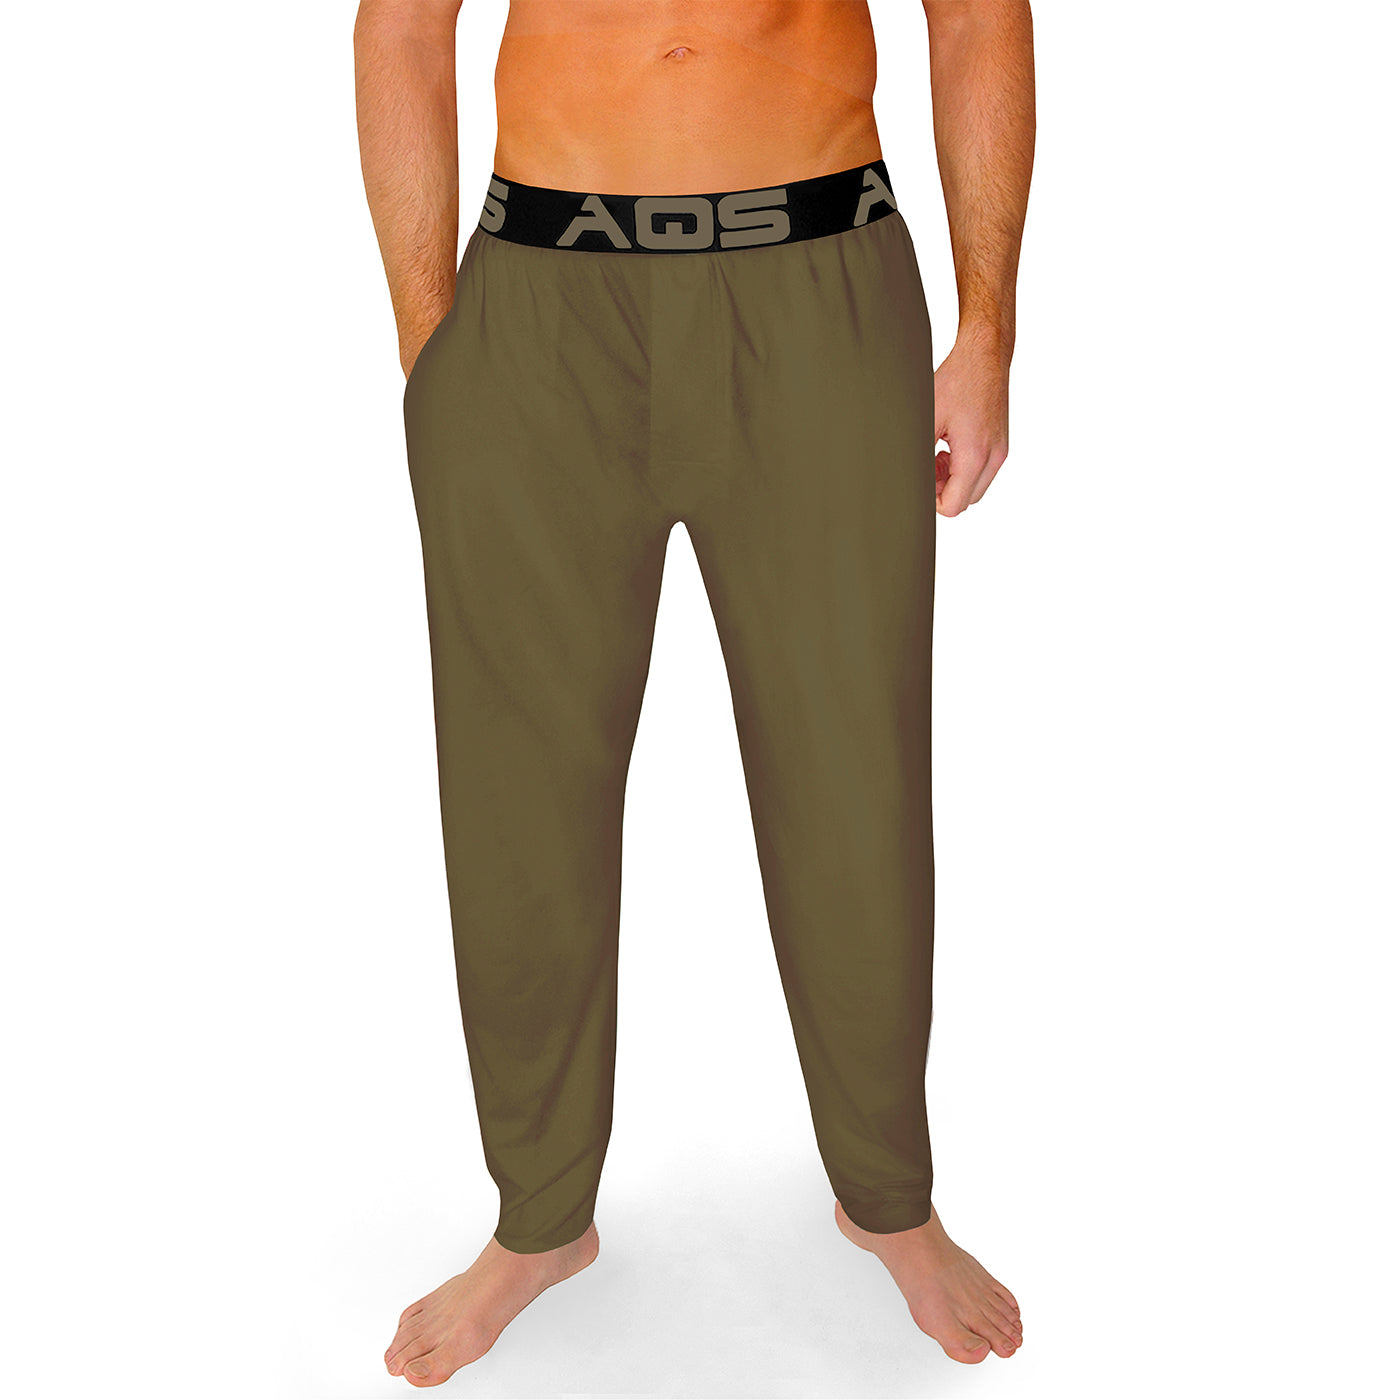 Aqs Super Soft Lounge Pants In Olive Green